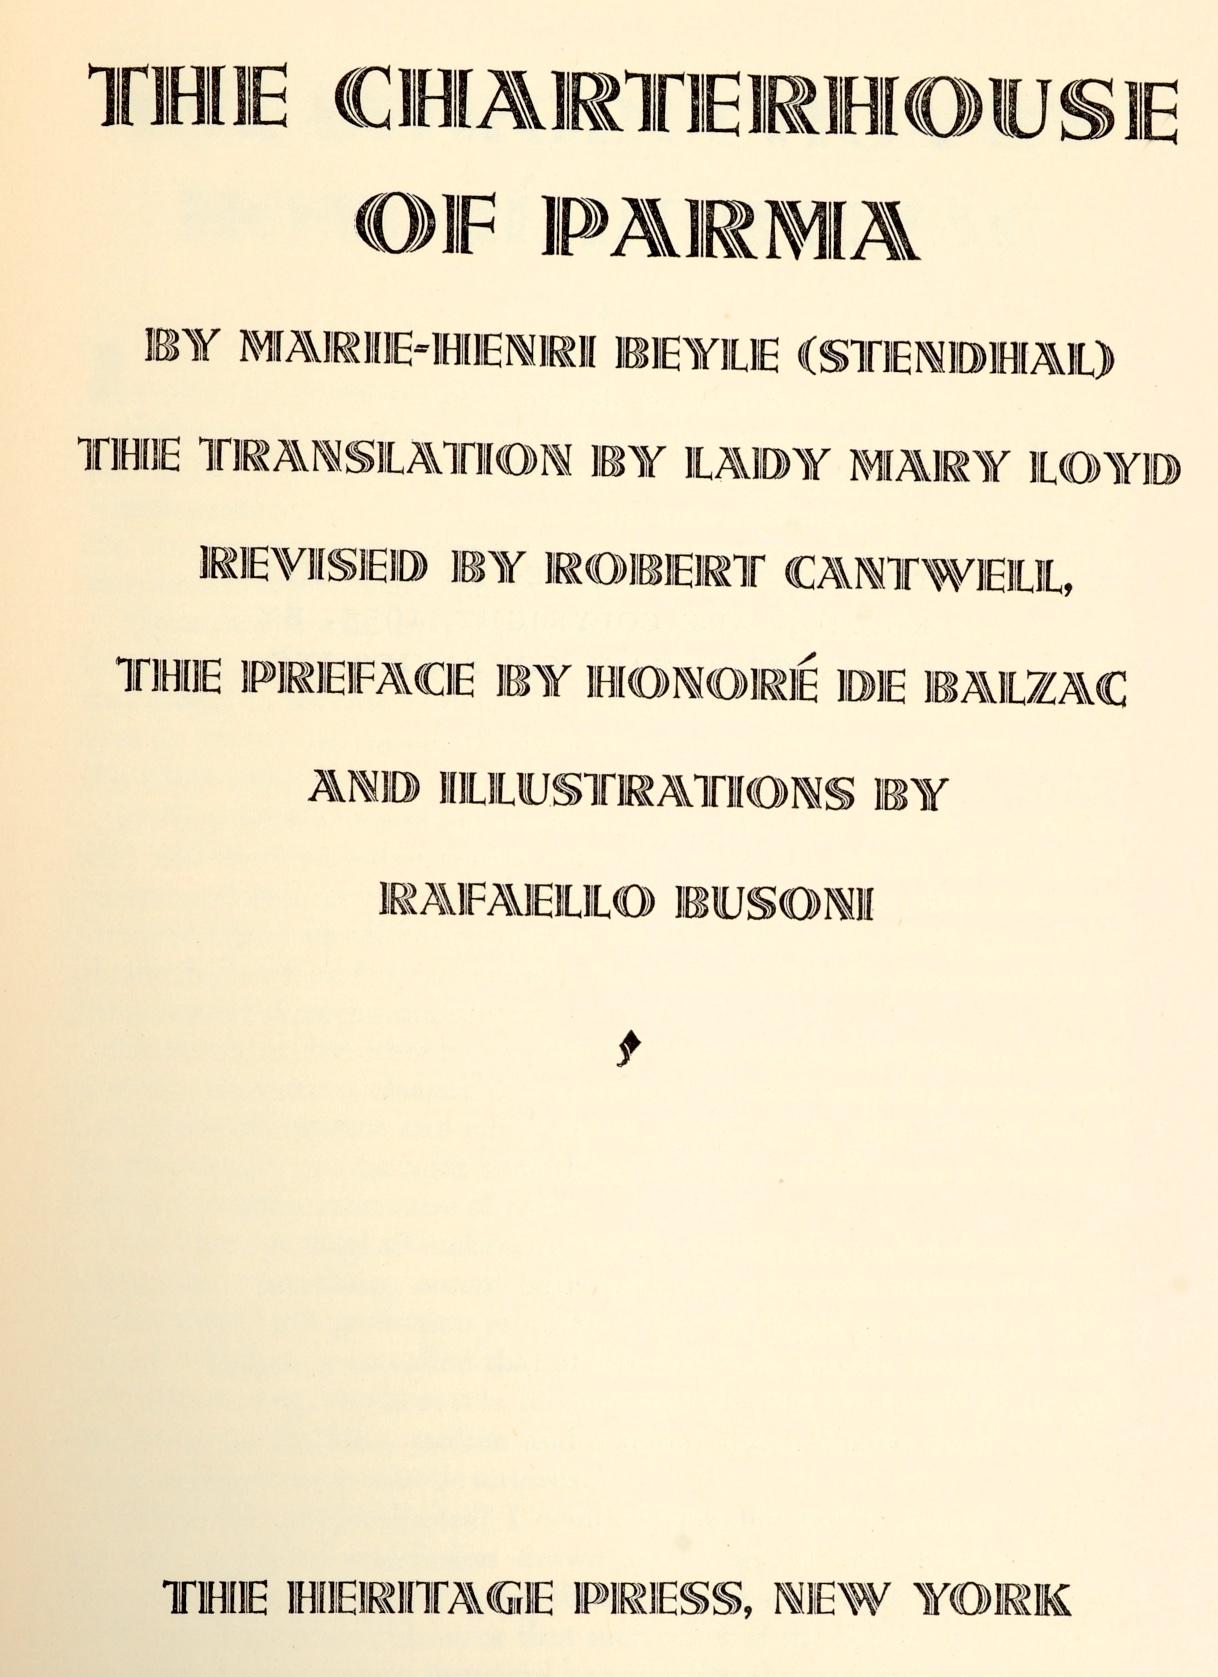 The Charterhouse of Parma by Marie-Henri Beyle (Stendhal), translation by Lady Mary Loyd. Revised by Robert Cantwell & Preface by Honore de Balzac. Illustrations by Rafaello Busoni. Heritage Press, 1992. First Edition thus hardcover with slipcase.